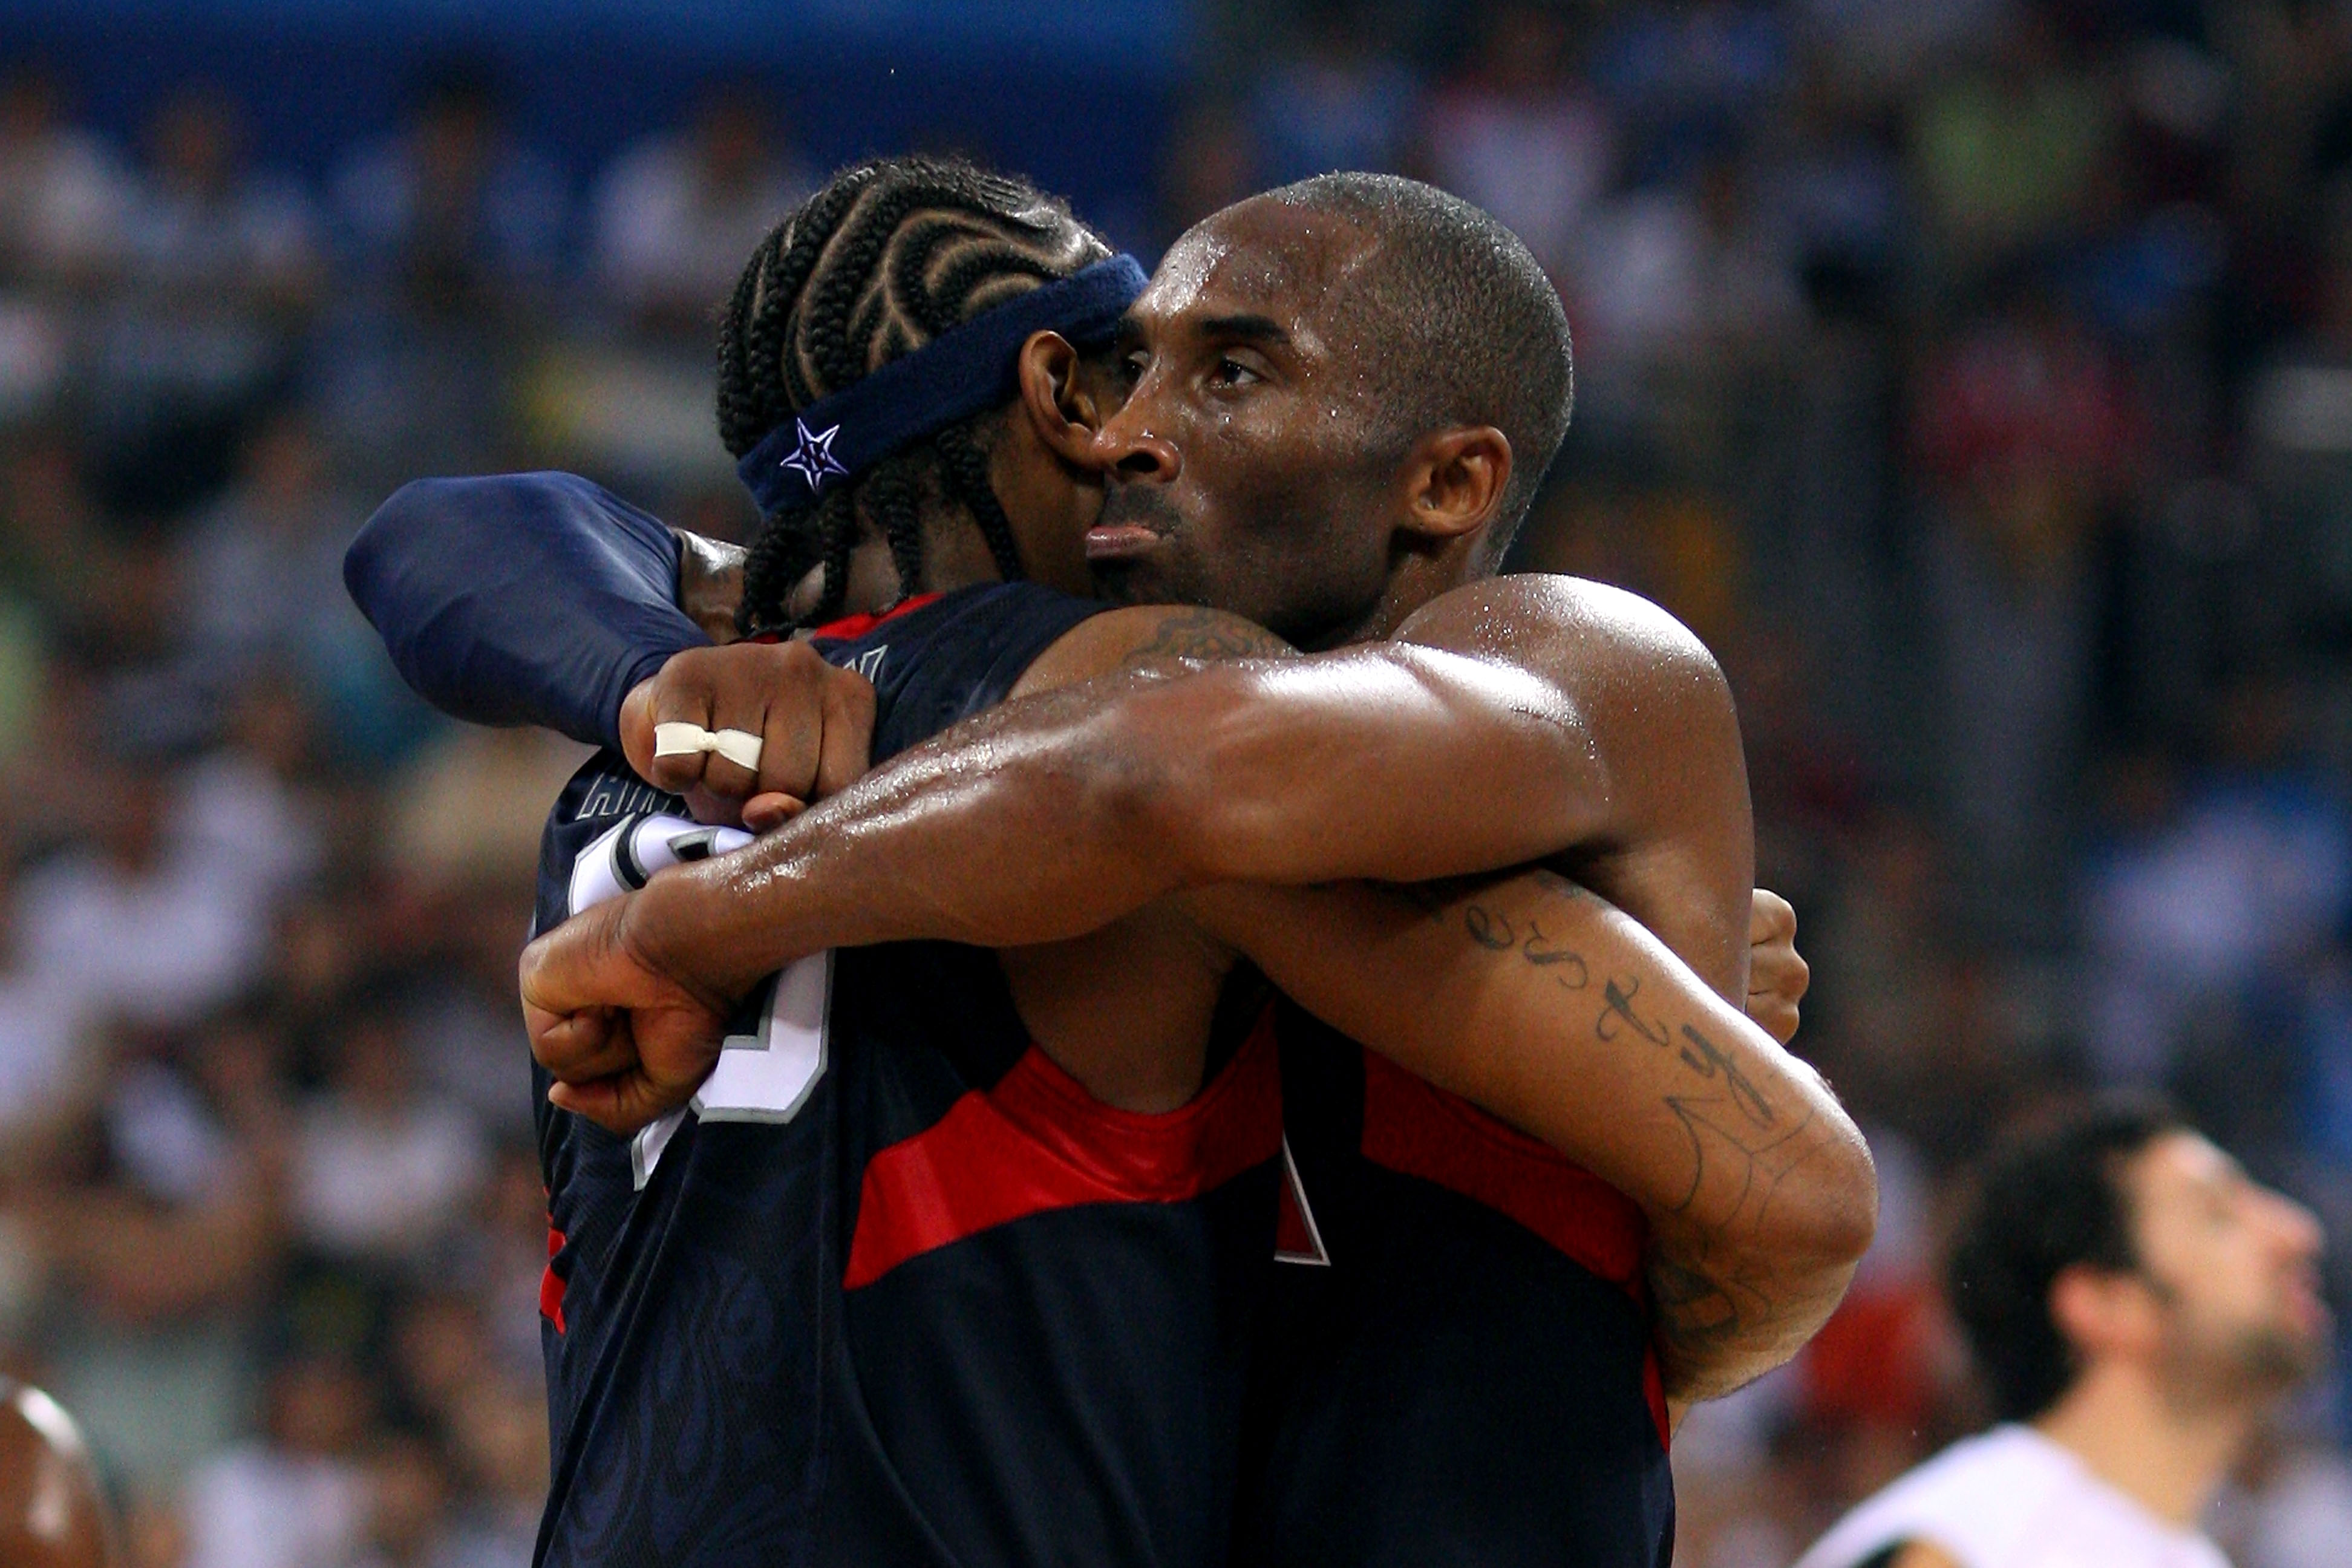 BEIJING - AUGUST 24: Kobe Bryant #10 and Carmelo Anthony #15 of the United States embrace after defeating Spain 118-107 in the gold medal game during Day 16 of the Beijing 2008 Olympic Games at the Beijing Olympic Basketball Gymnasium on August 24, 2008 i